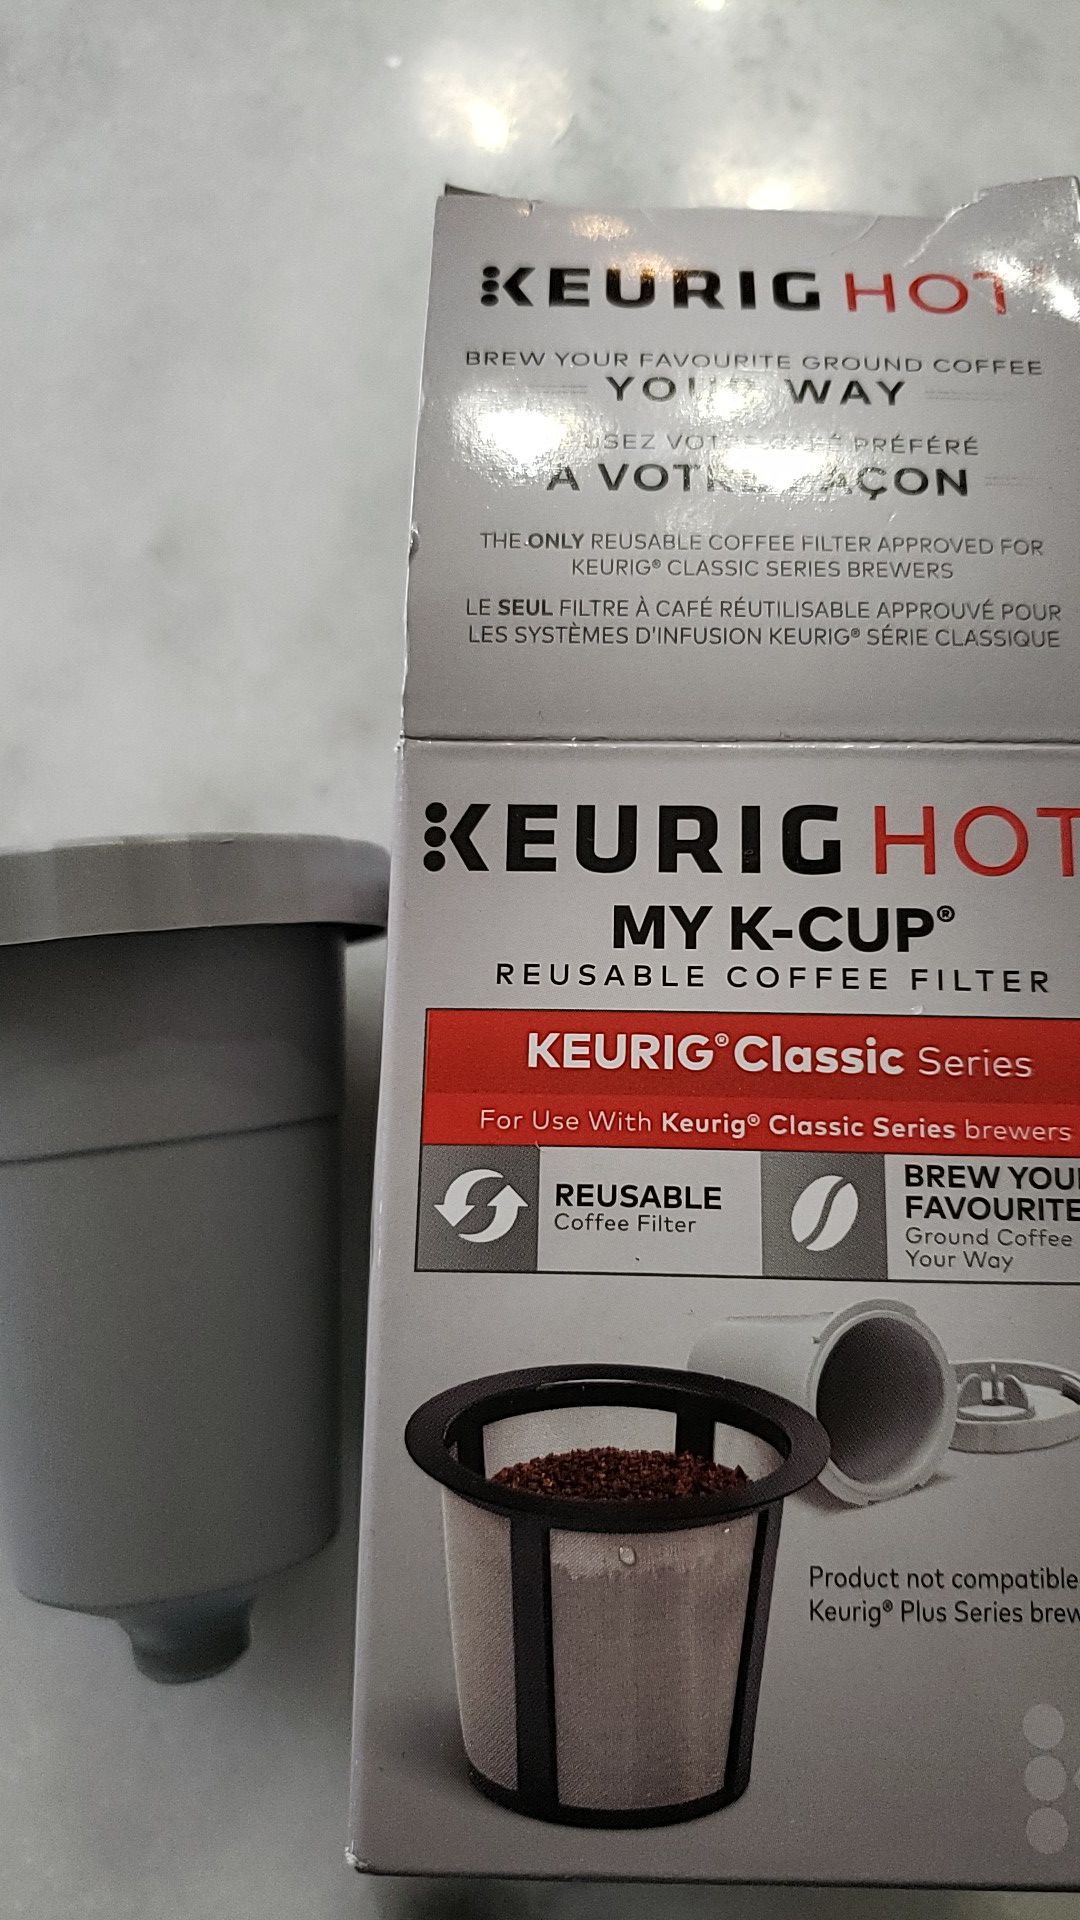 2 Keurig K-Cup reusable coffee filters (for classic series)